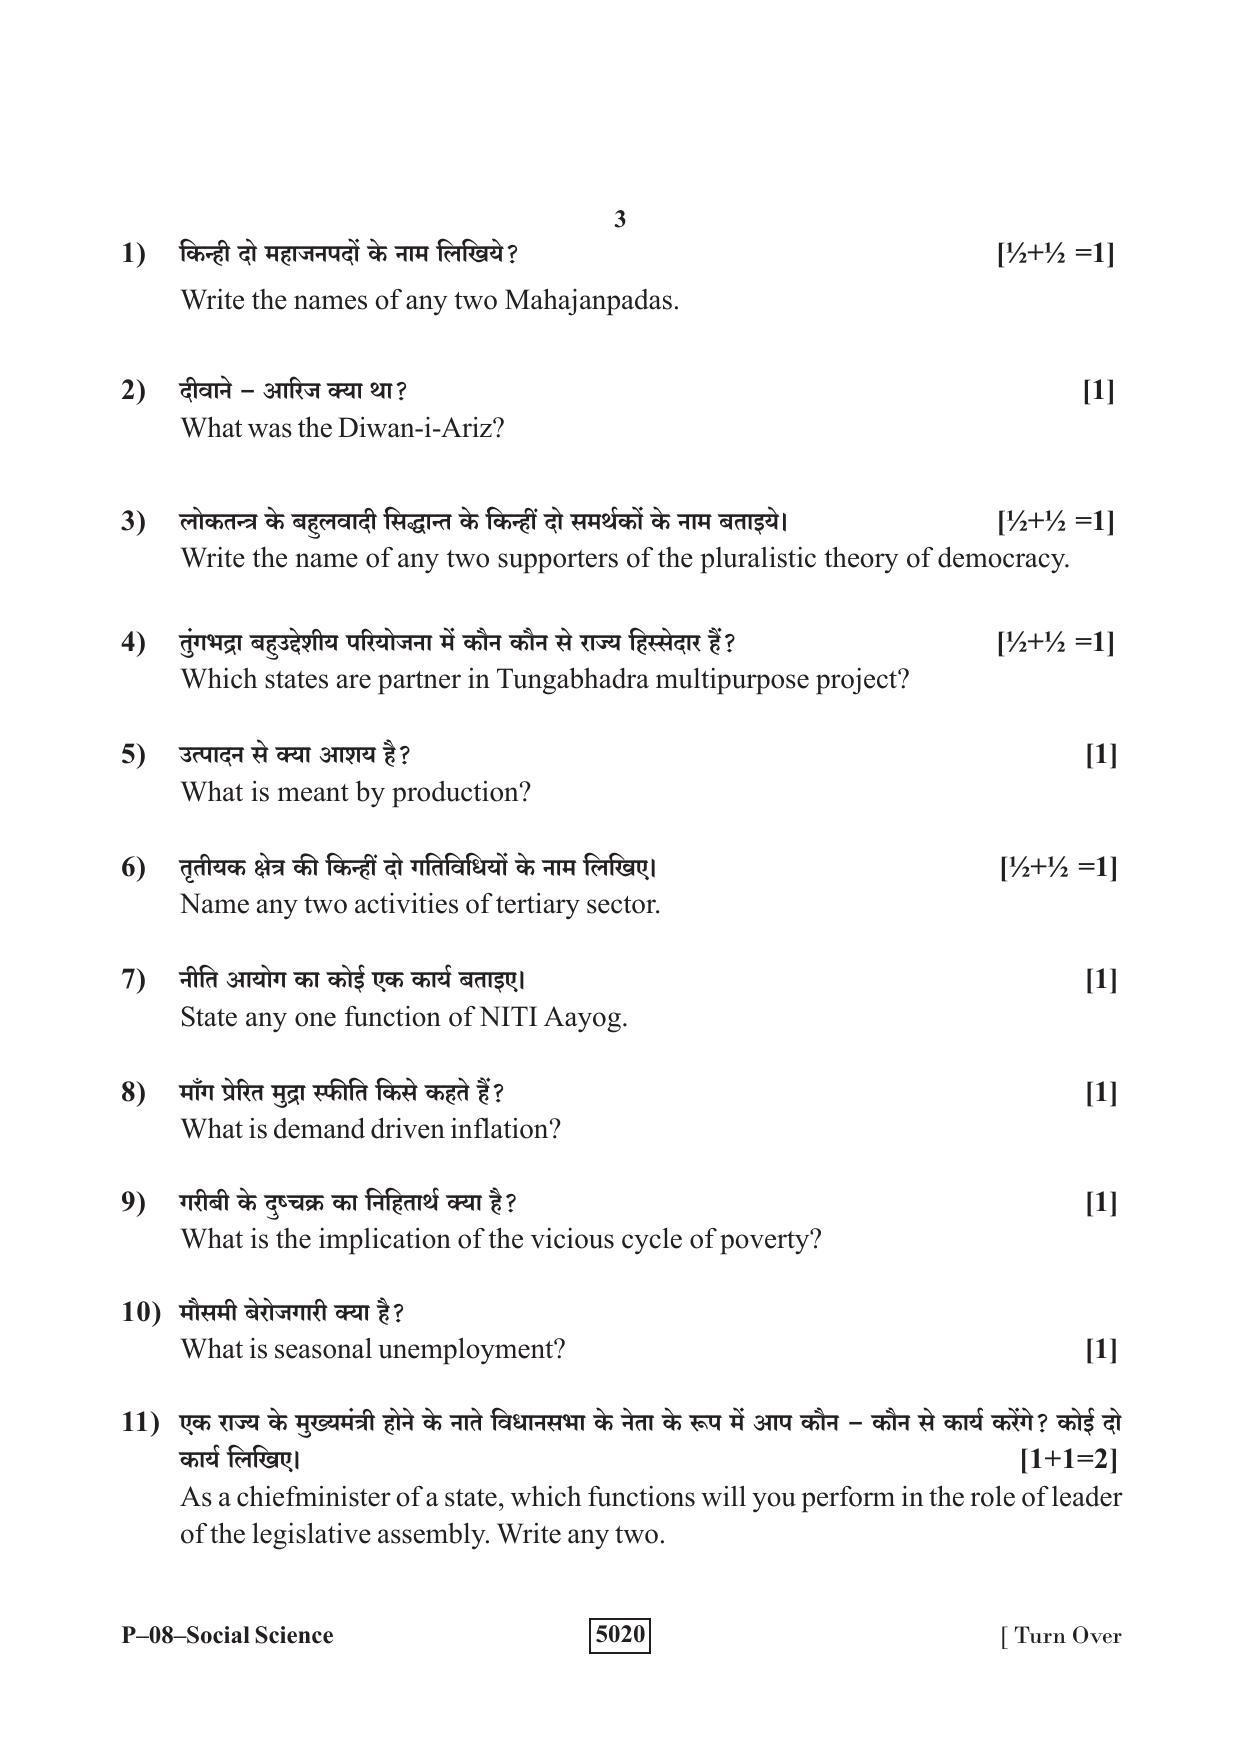 RBSE 2019 Social Science Praveshika Question Paper - Page 3